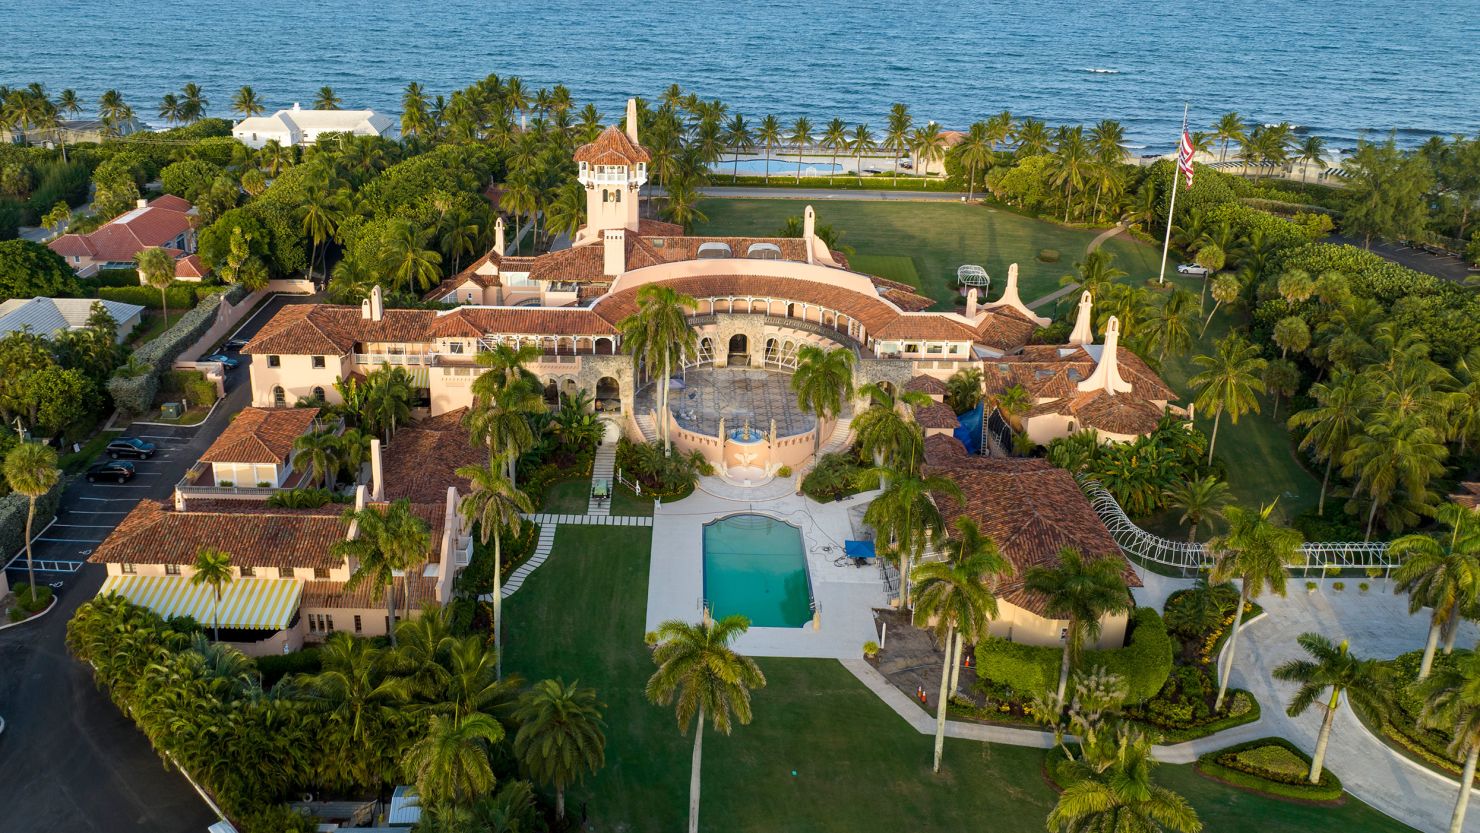 An aerial view of former President Donald Trump's Mar-a-Lago estate, August 10, 2022, in Palm Beach, Florida.